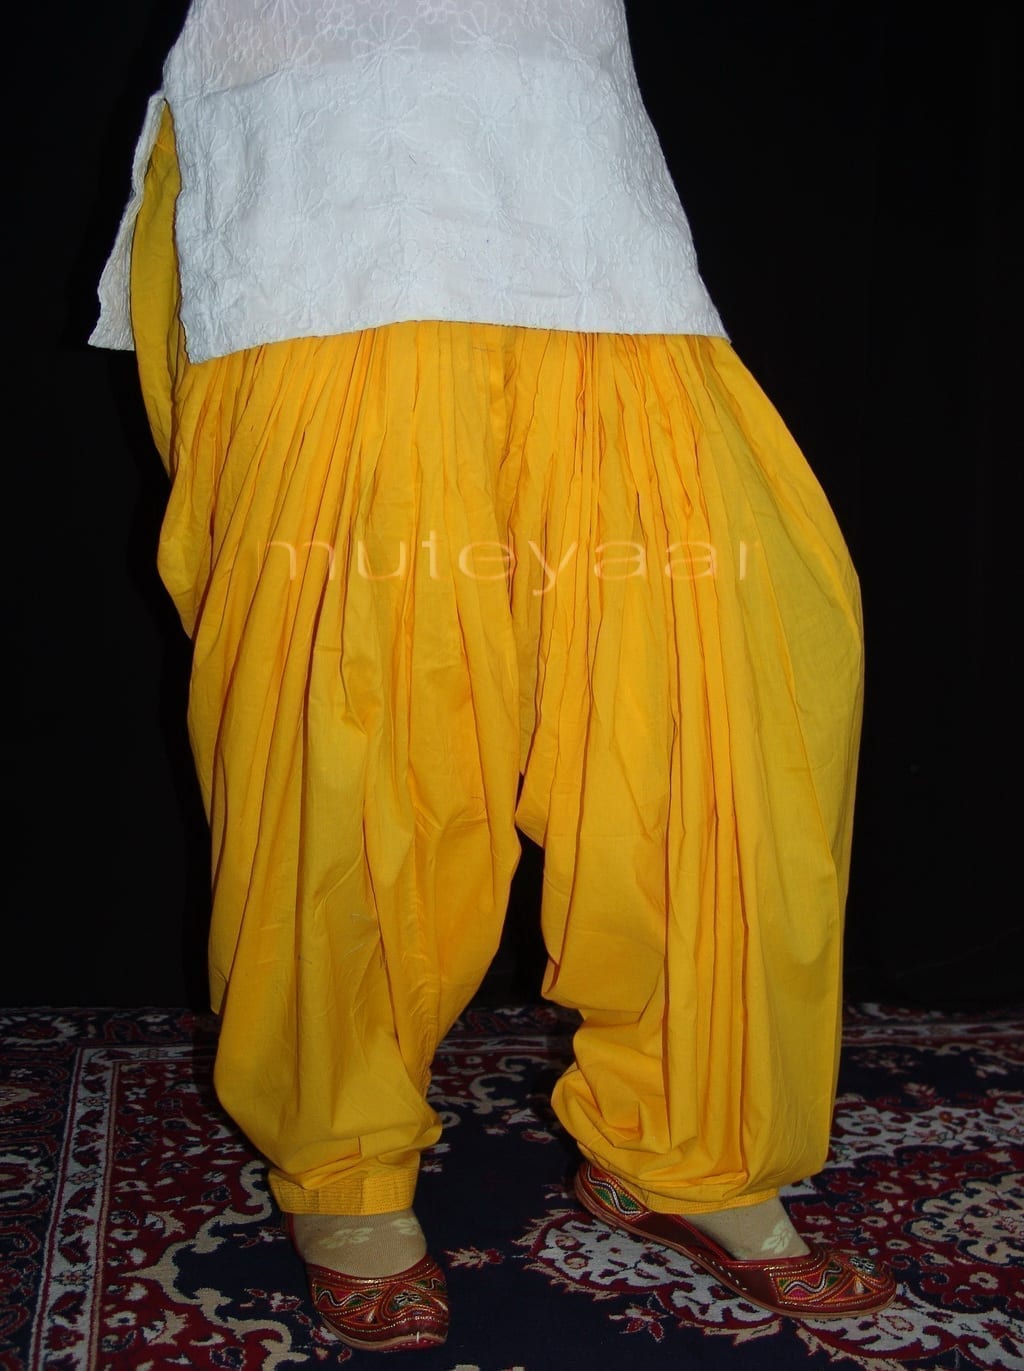 Jeans  Pants  A Plain Biscuit Colur Pant With Small Zig Zig Line On It  With 100 Pure Cotton  Freeup